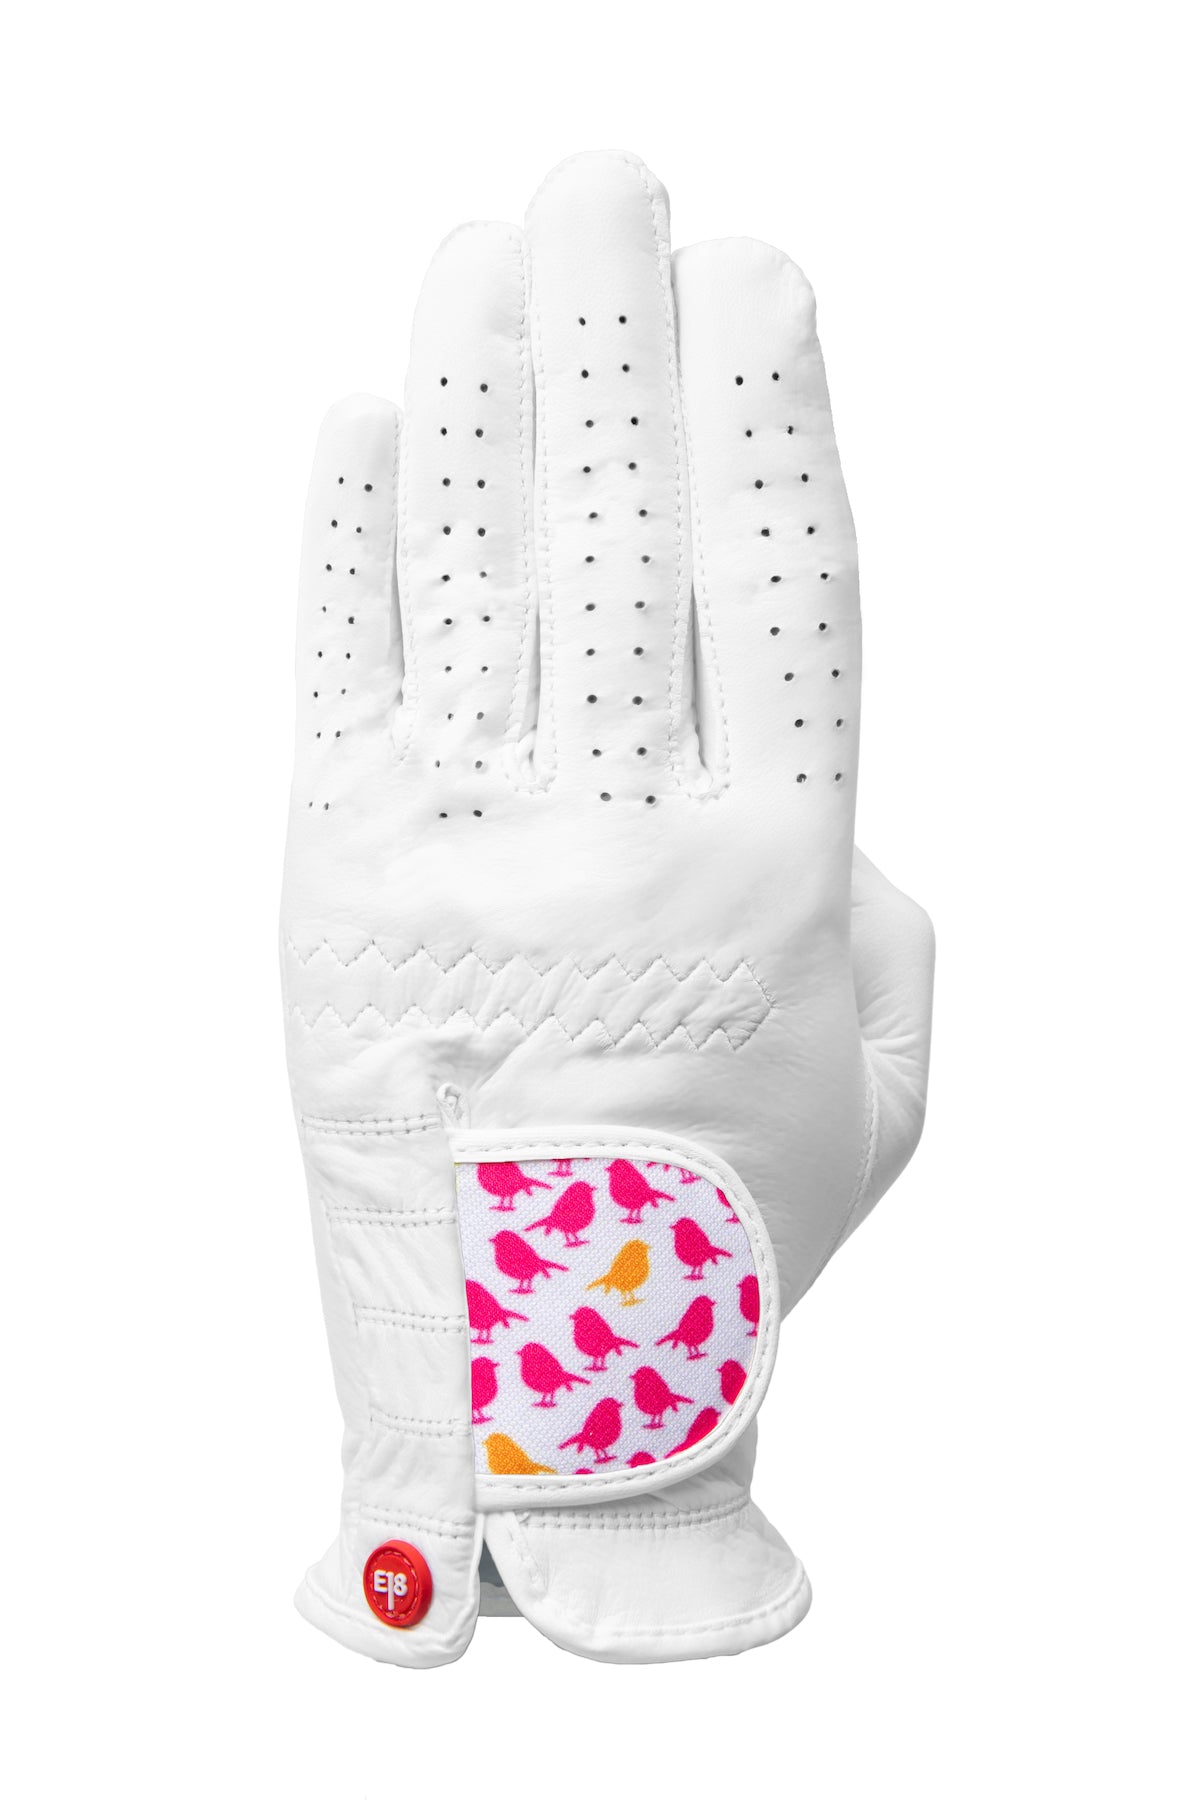 NEW! Glove It 2018 is coming soon! - Pink Golf Tees